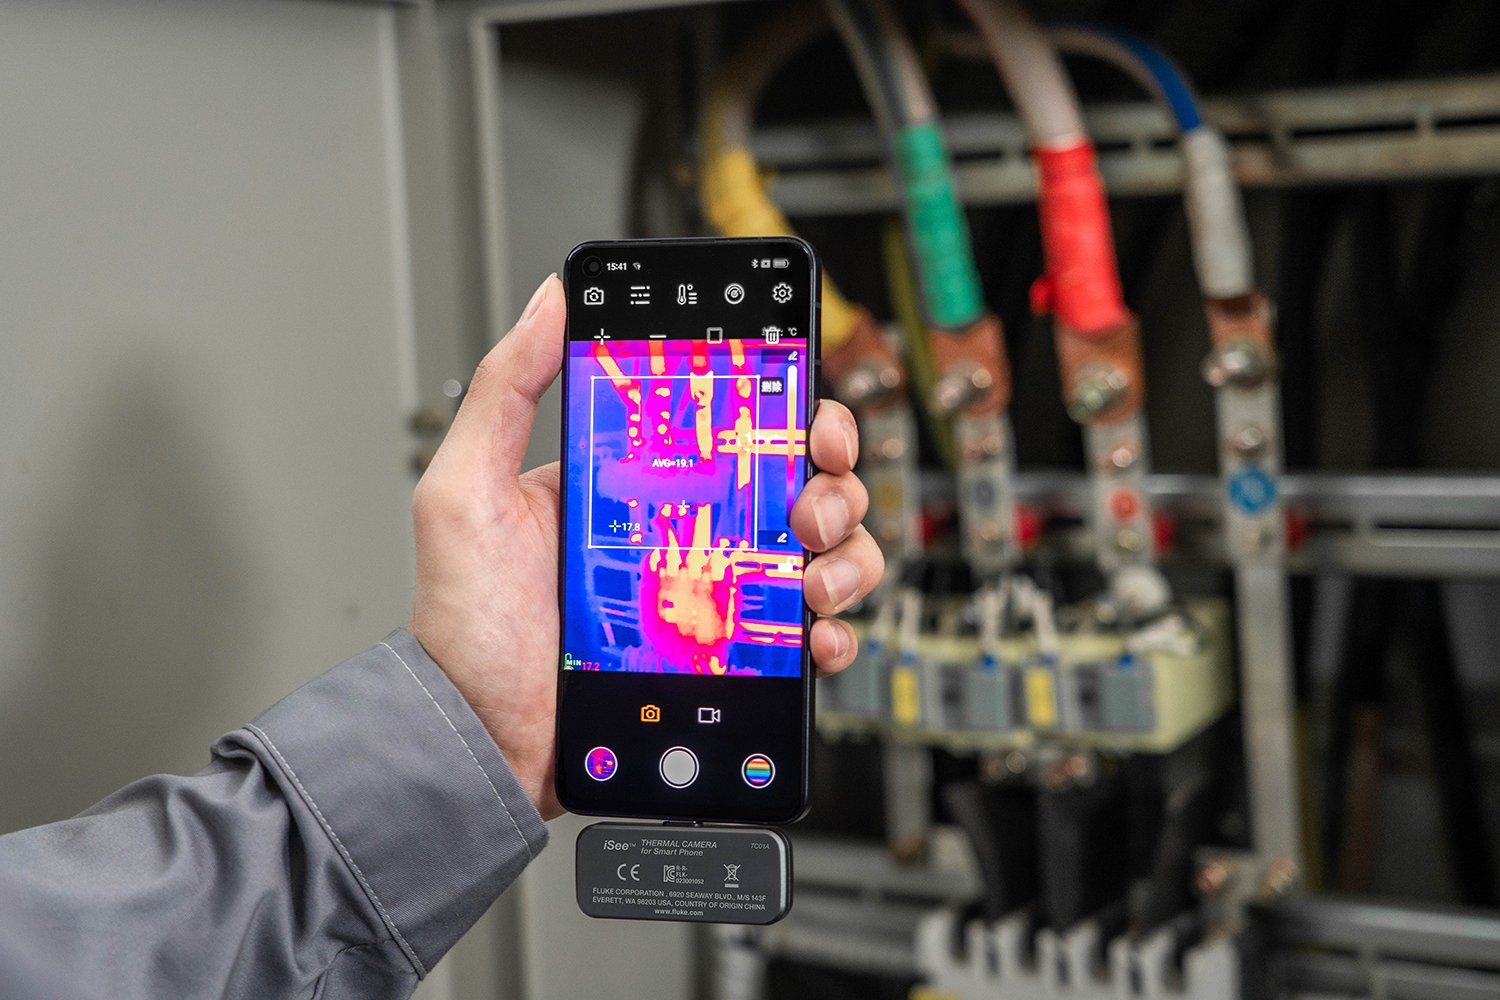 FIRST LOOK 👀 Fluke TC01A iSEE Mobile Thermal Camera for Android  #welovetools 